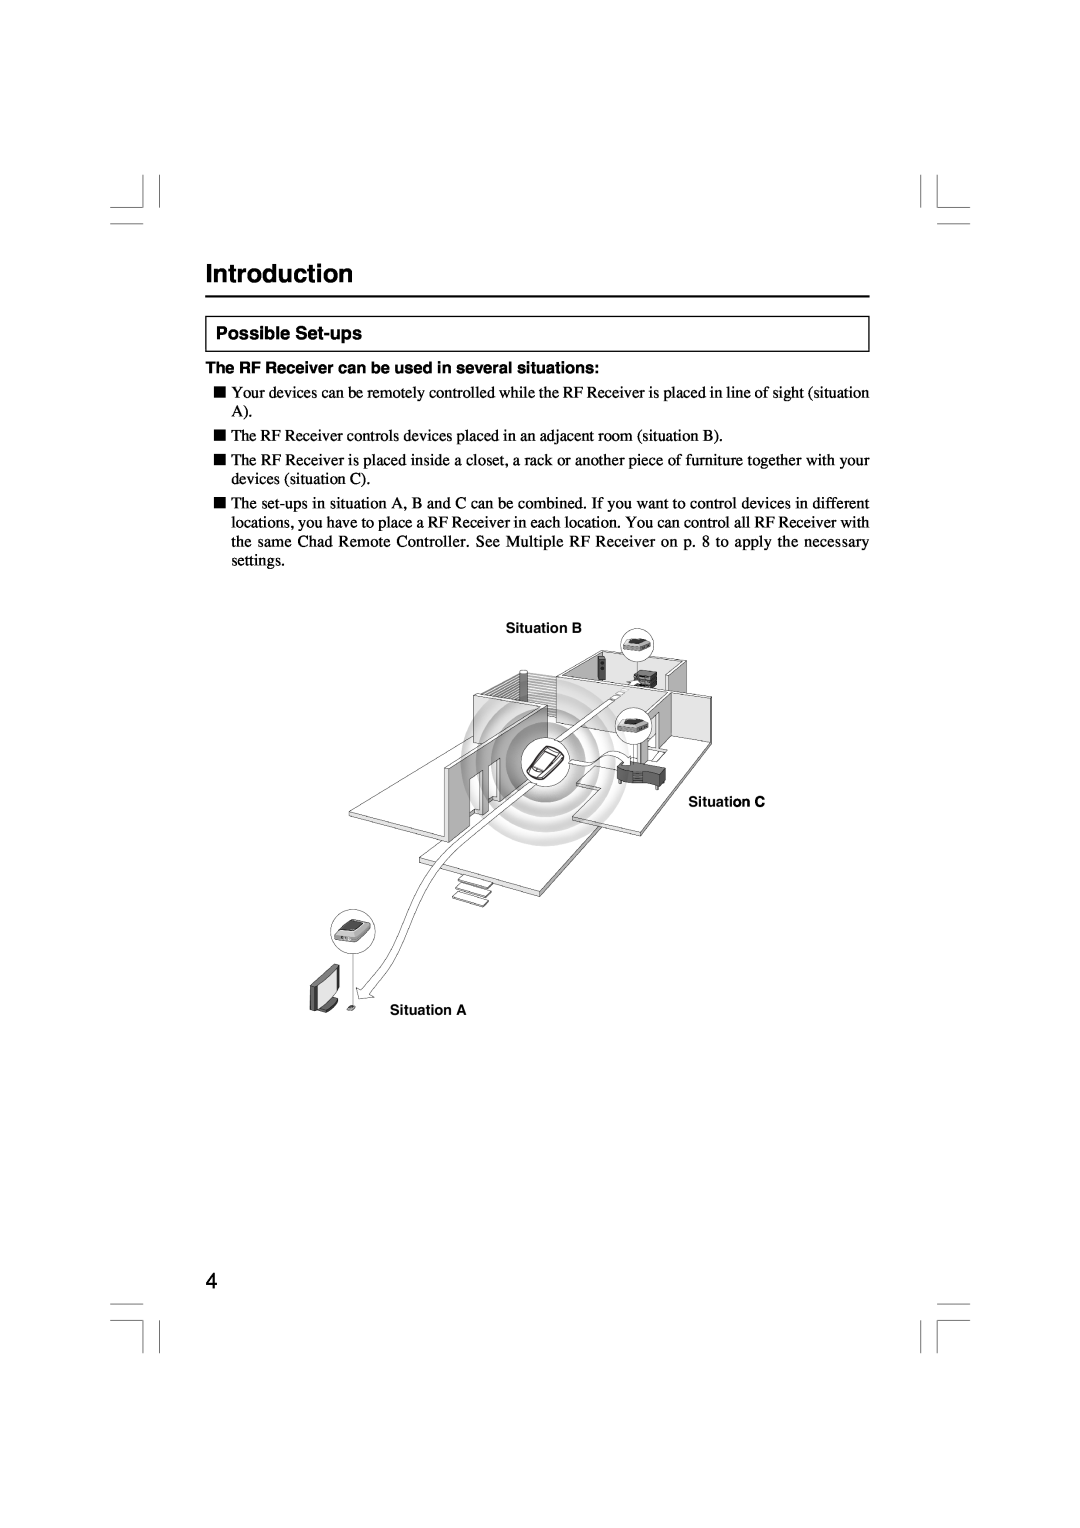 Onkyo RFR-5 instruction manual Introduction, Possible Set-ups, The RF Receiver can be used in several situations 